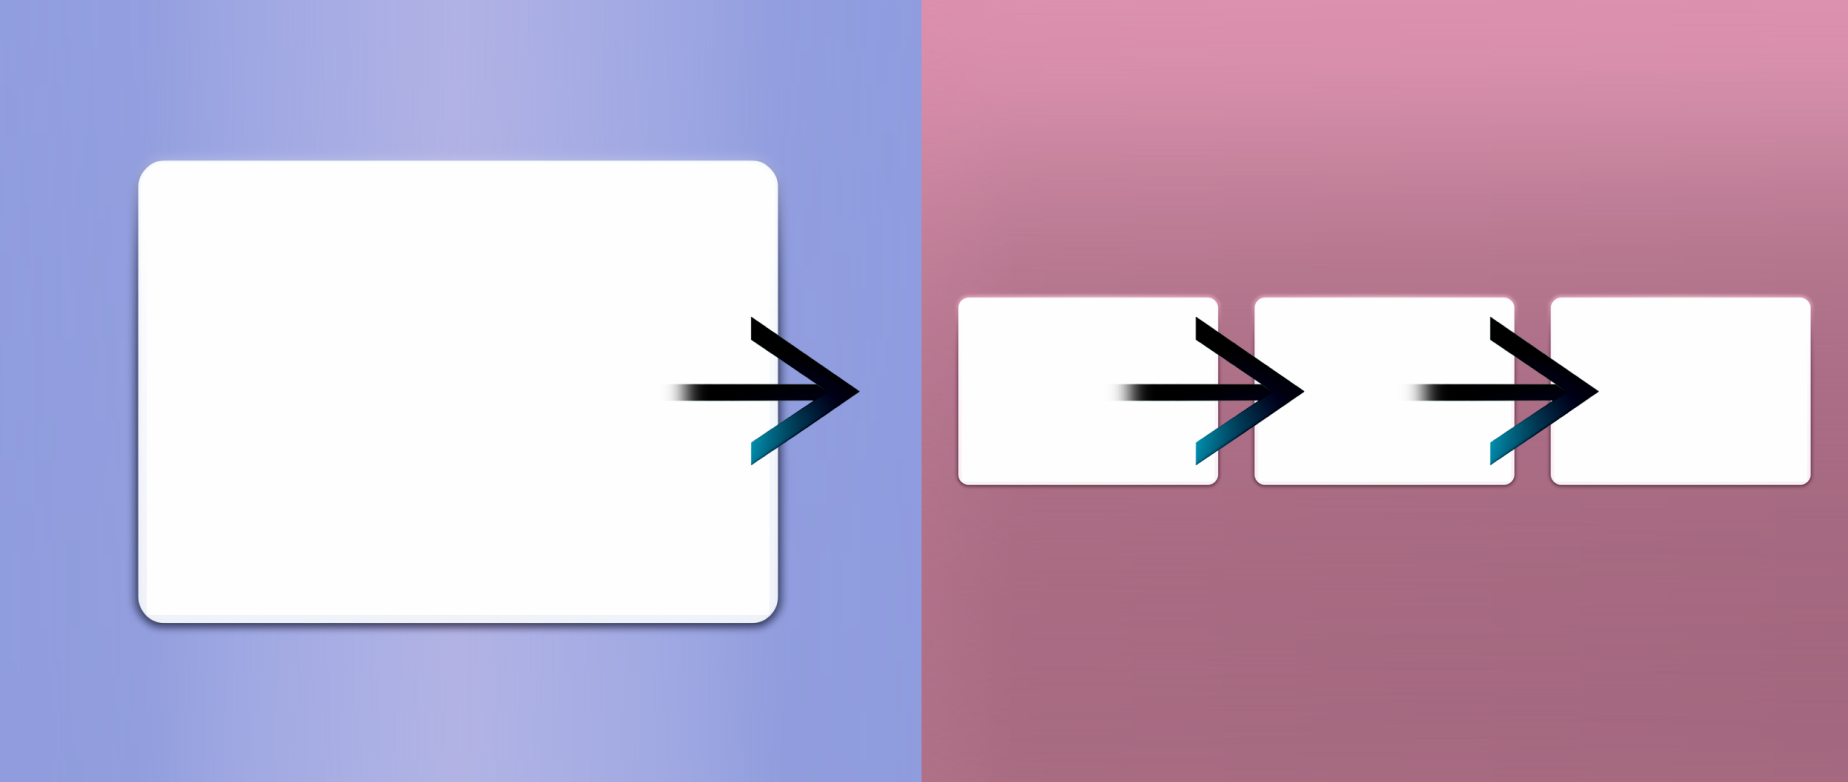 A white square with a black arrow on a purple background next to three white squares with arrows on a pink background.